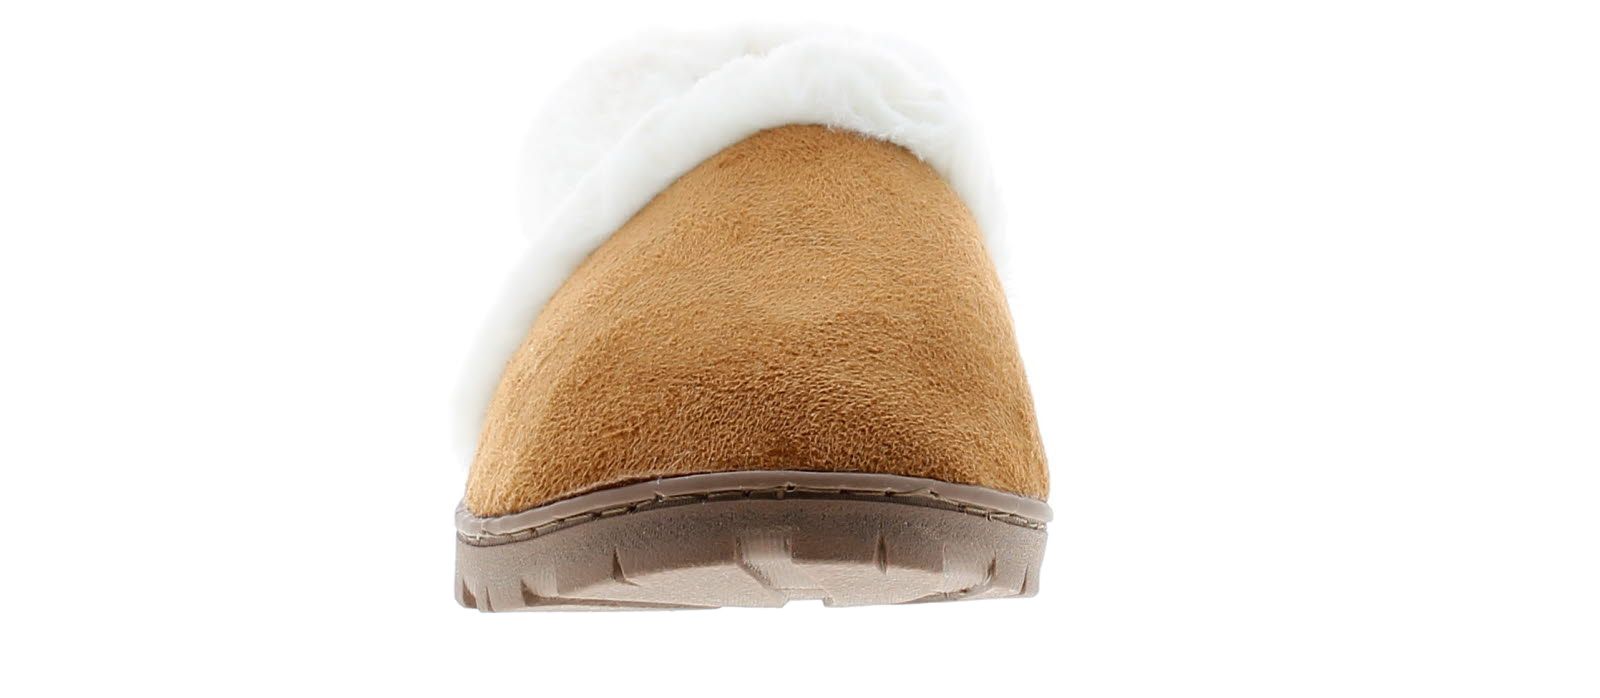 Wynsors Dora Womens Slippers In Chestnut. Ladies Microfibre Full Slipper With Faux Fur Collar And TrimFabric UpperFabric LiningSynthetic SoleLadies Microfibre Full Slipper With Faux Fur Collar Lining And Trim